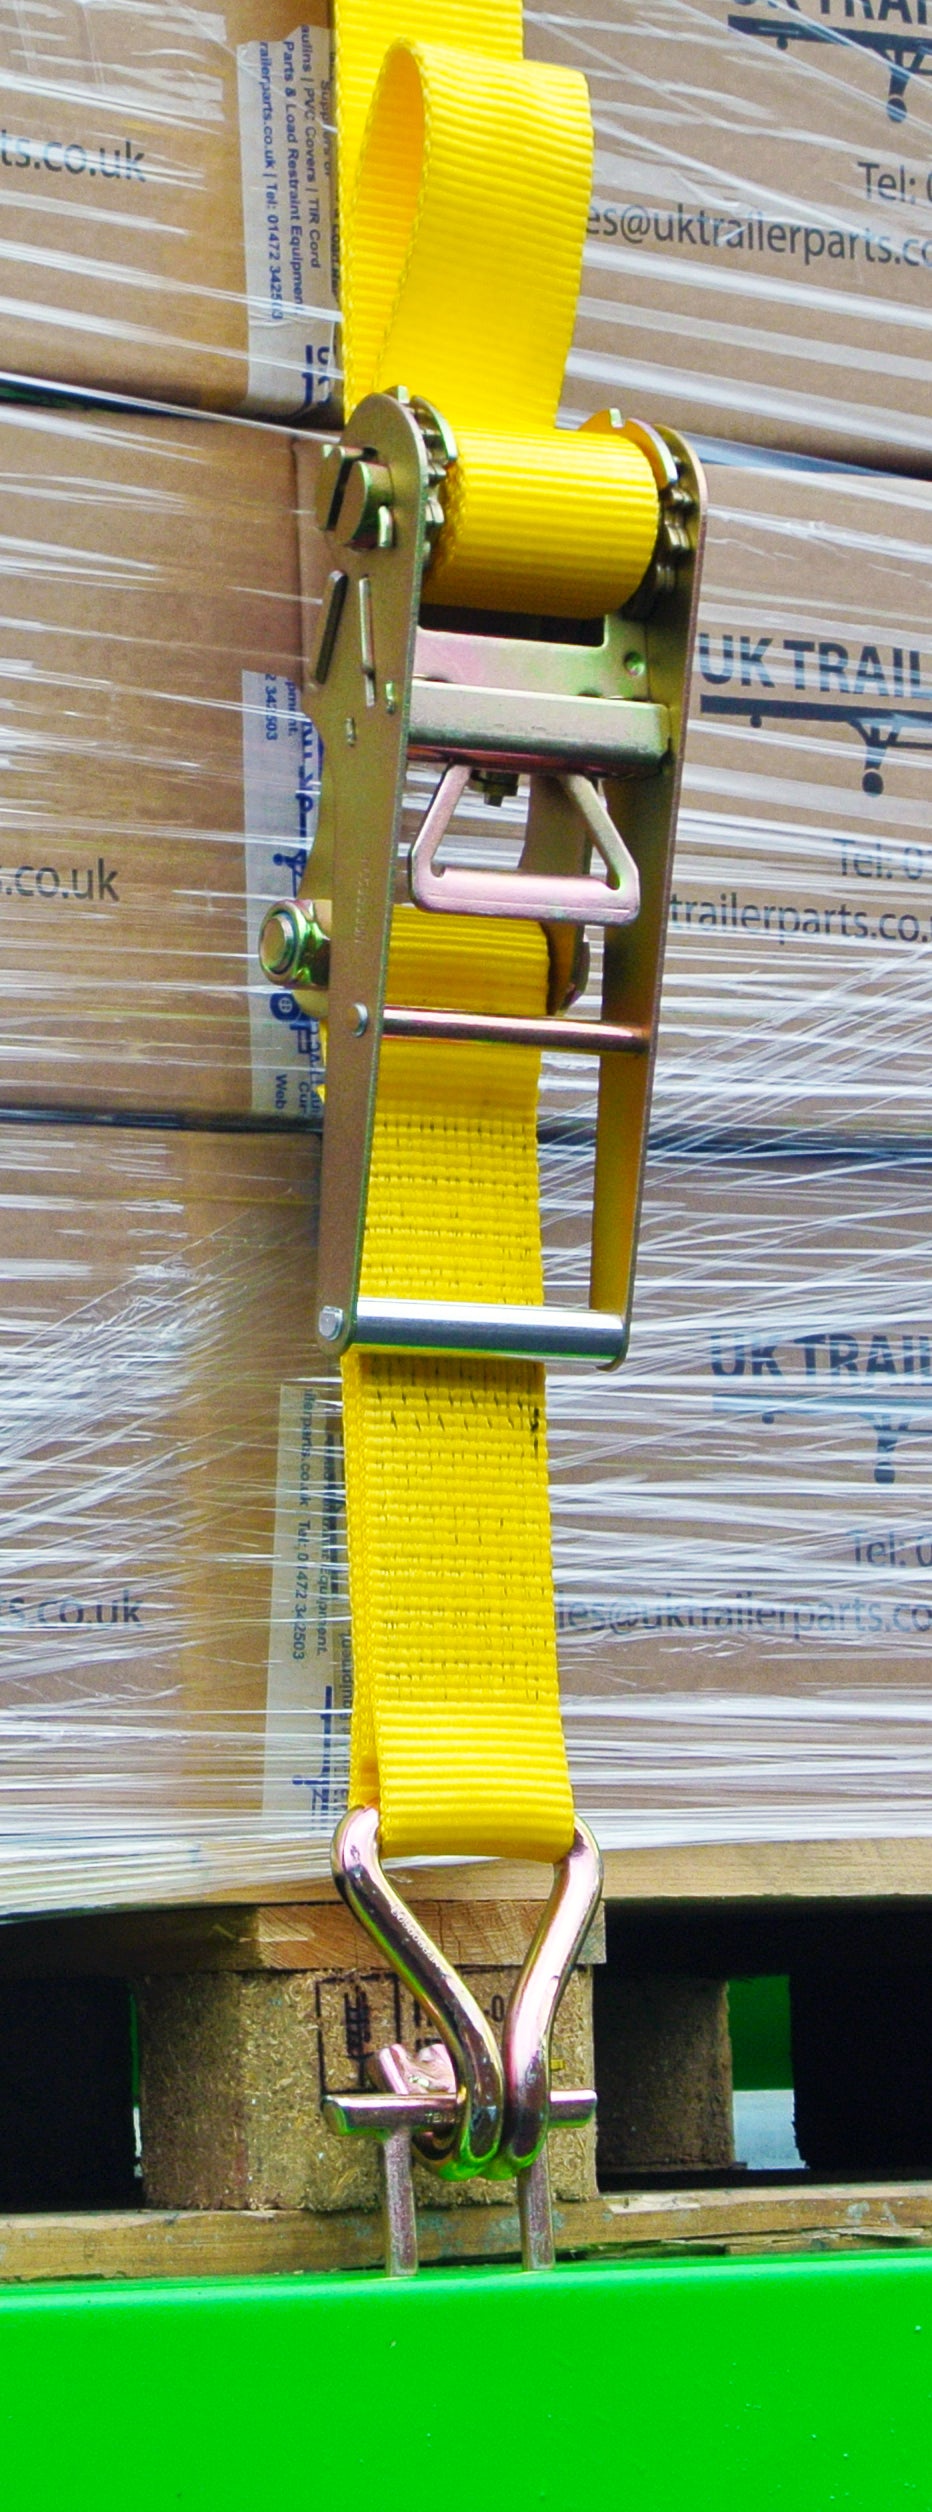 10,000kg ratchet strap with claw fitting. Fitted on a pallet with boxes.